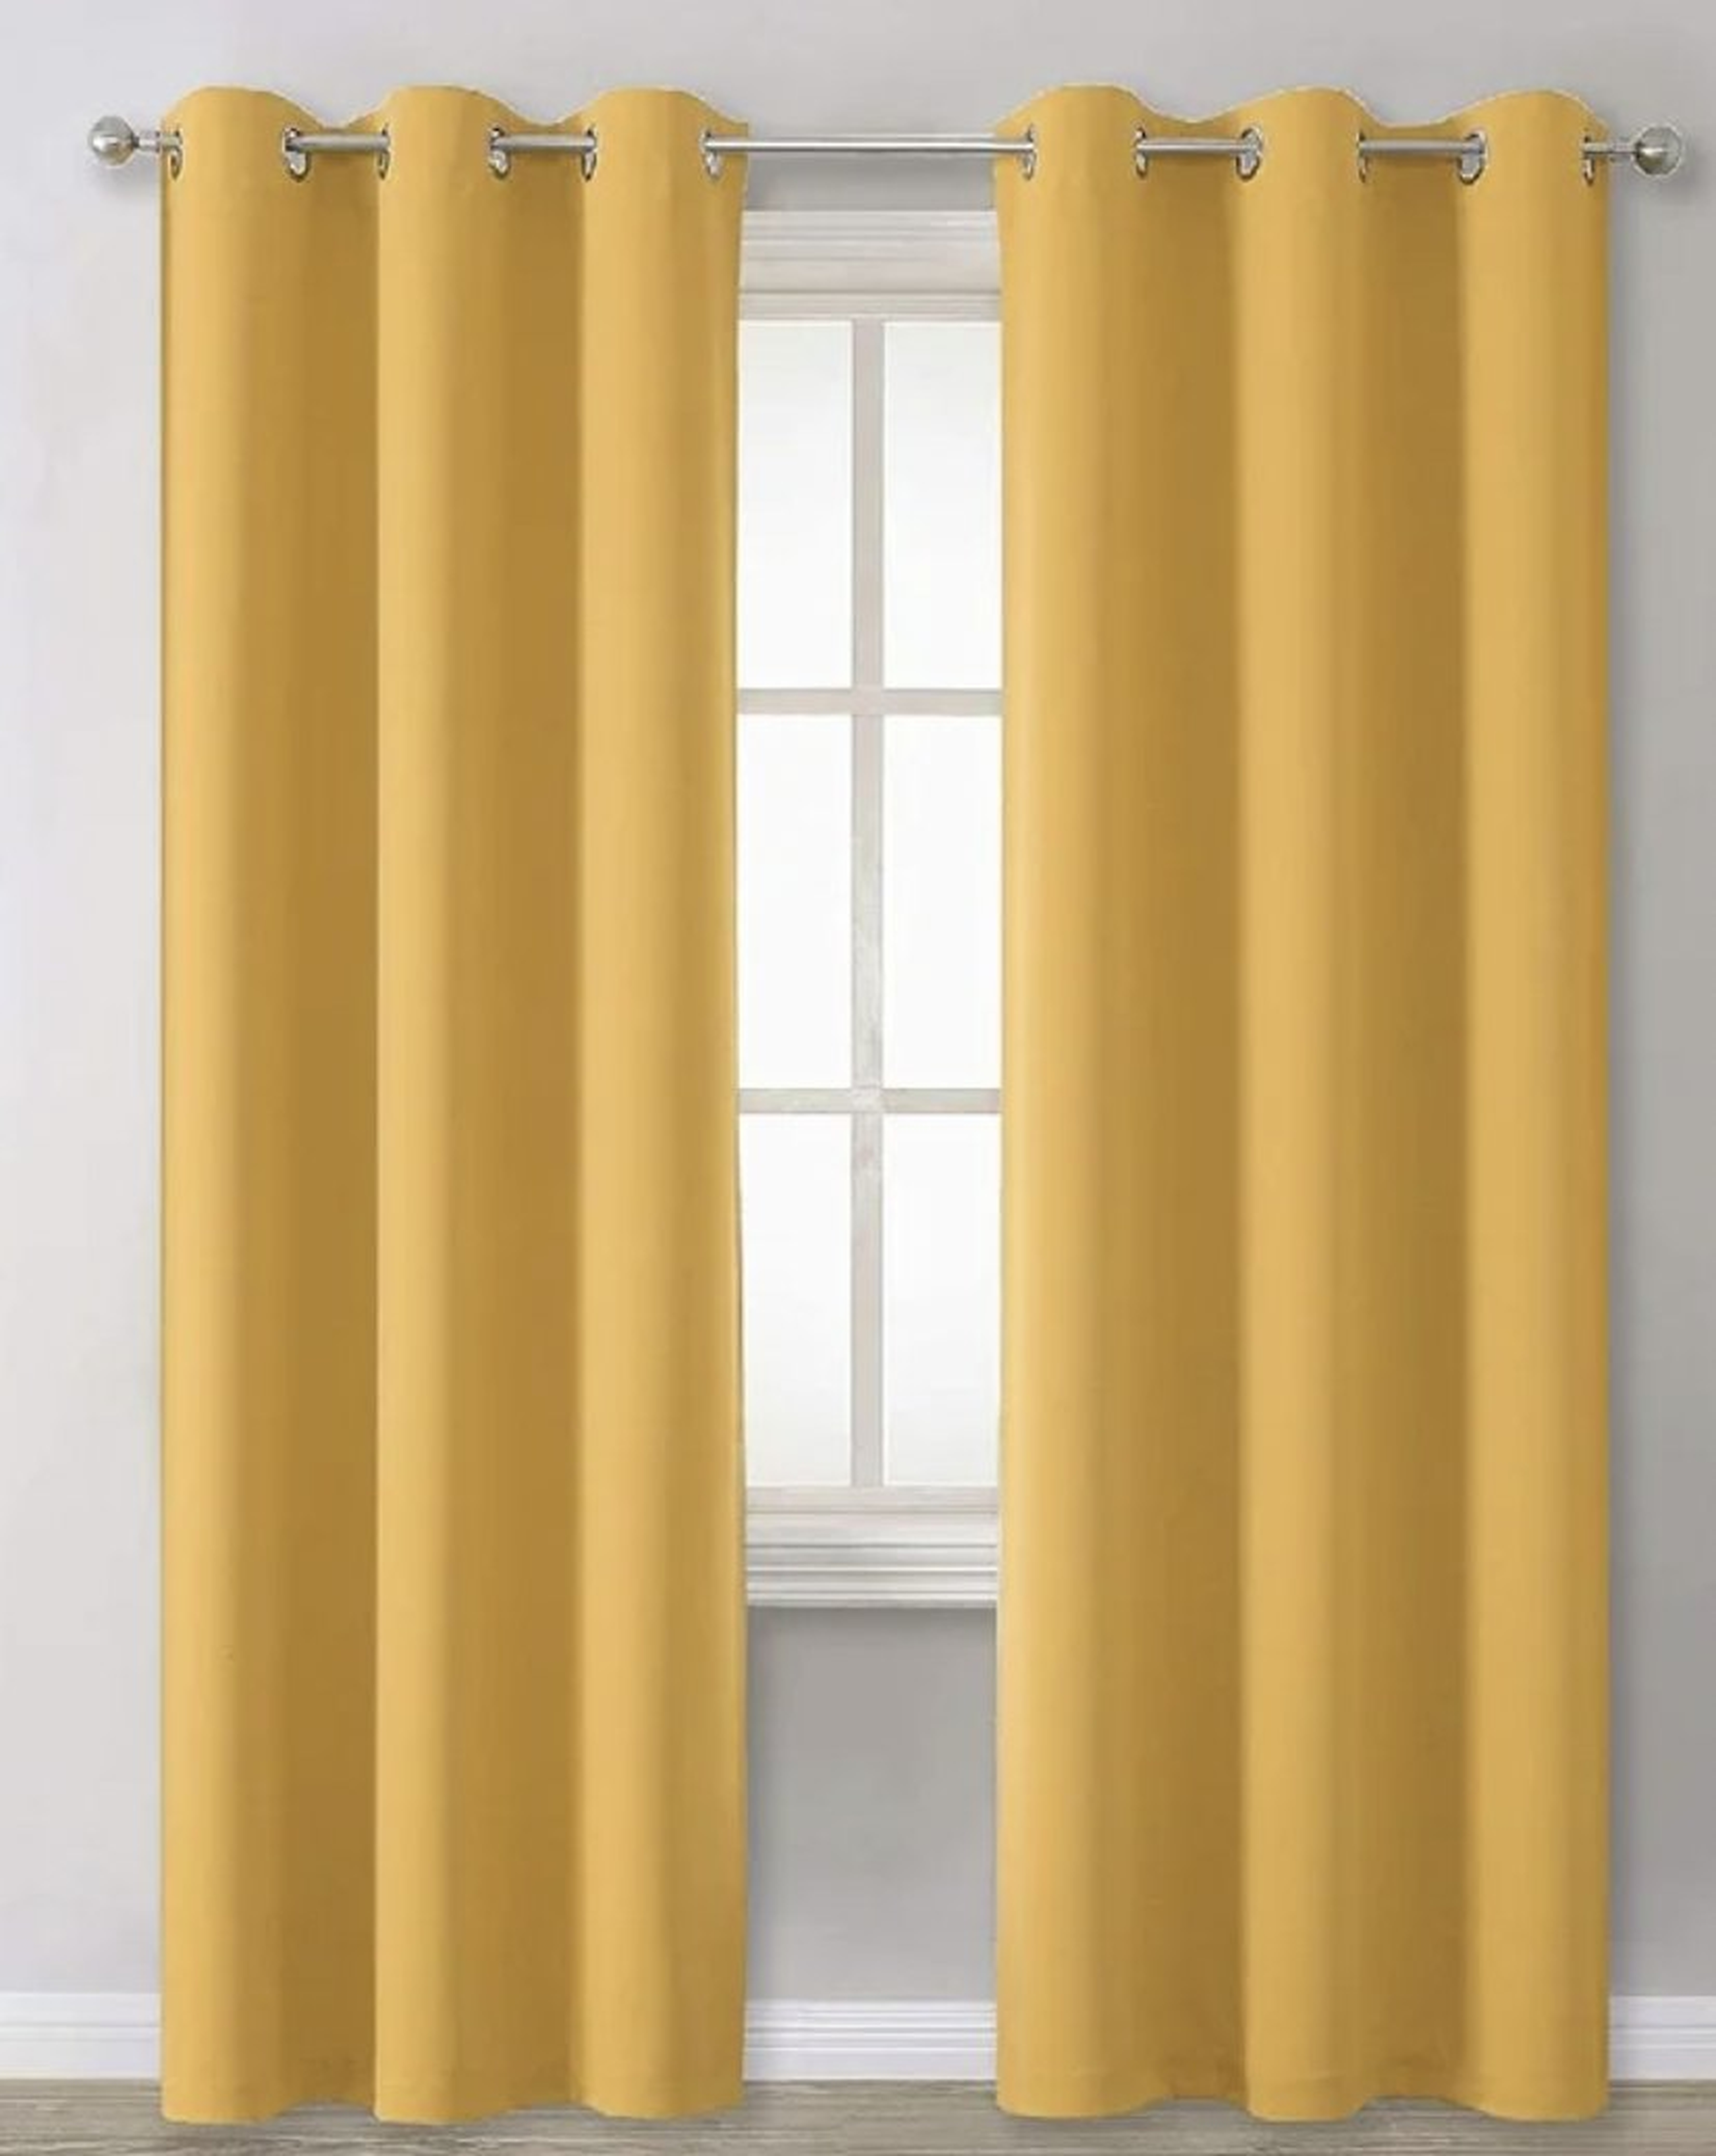 Blackout Curtain Panels 84 Inches Long Solid Window Curtain Drapes Thermal - Wayfair